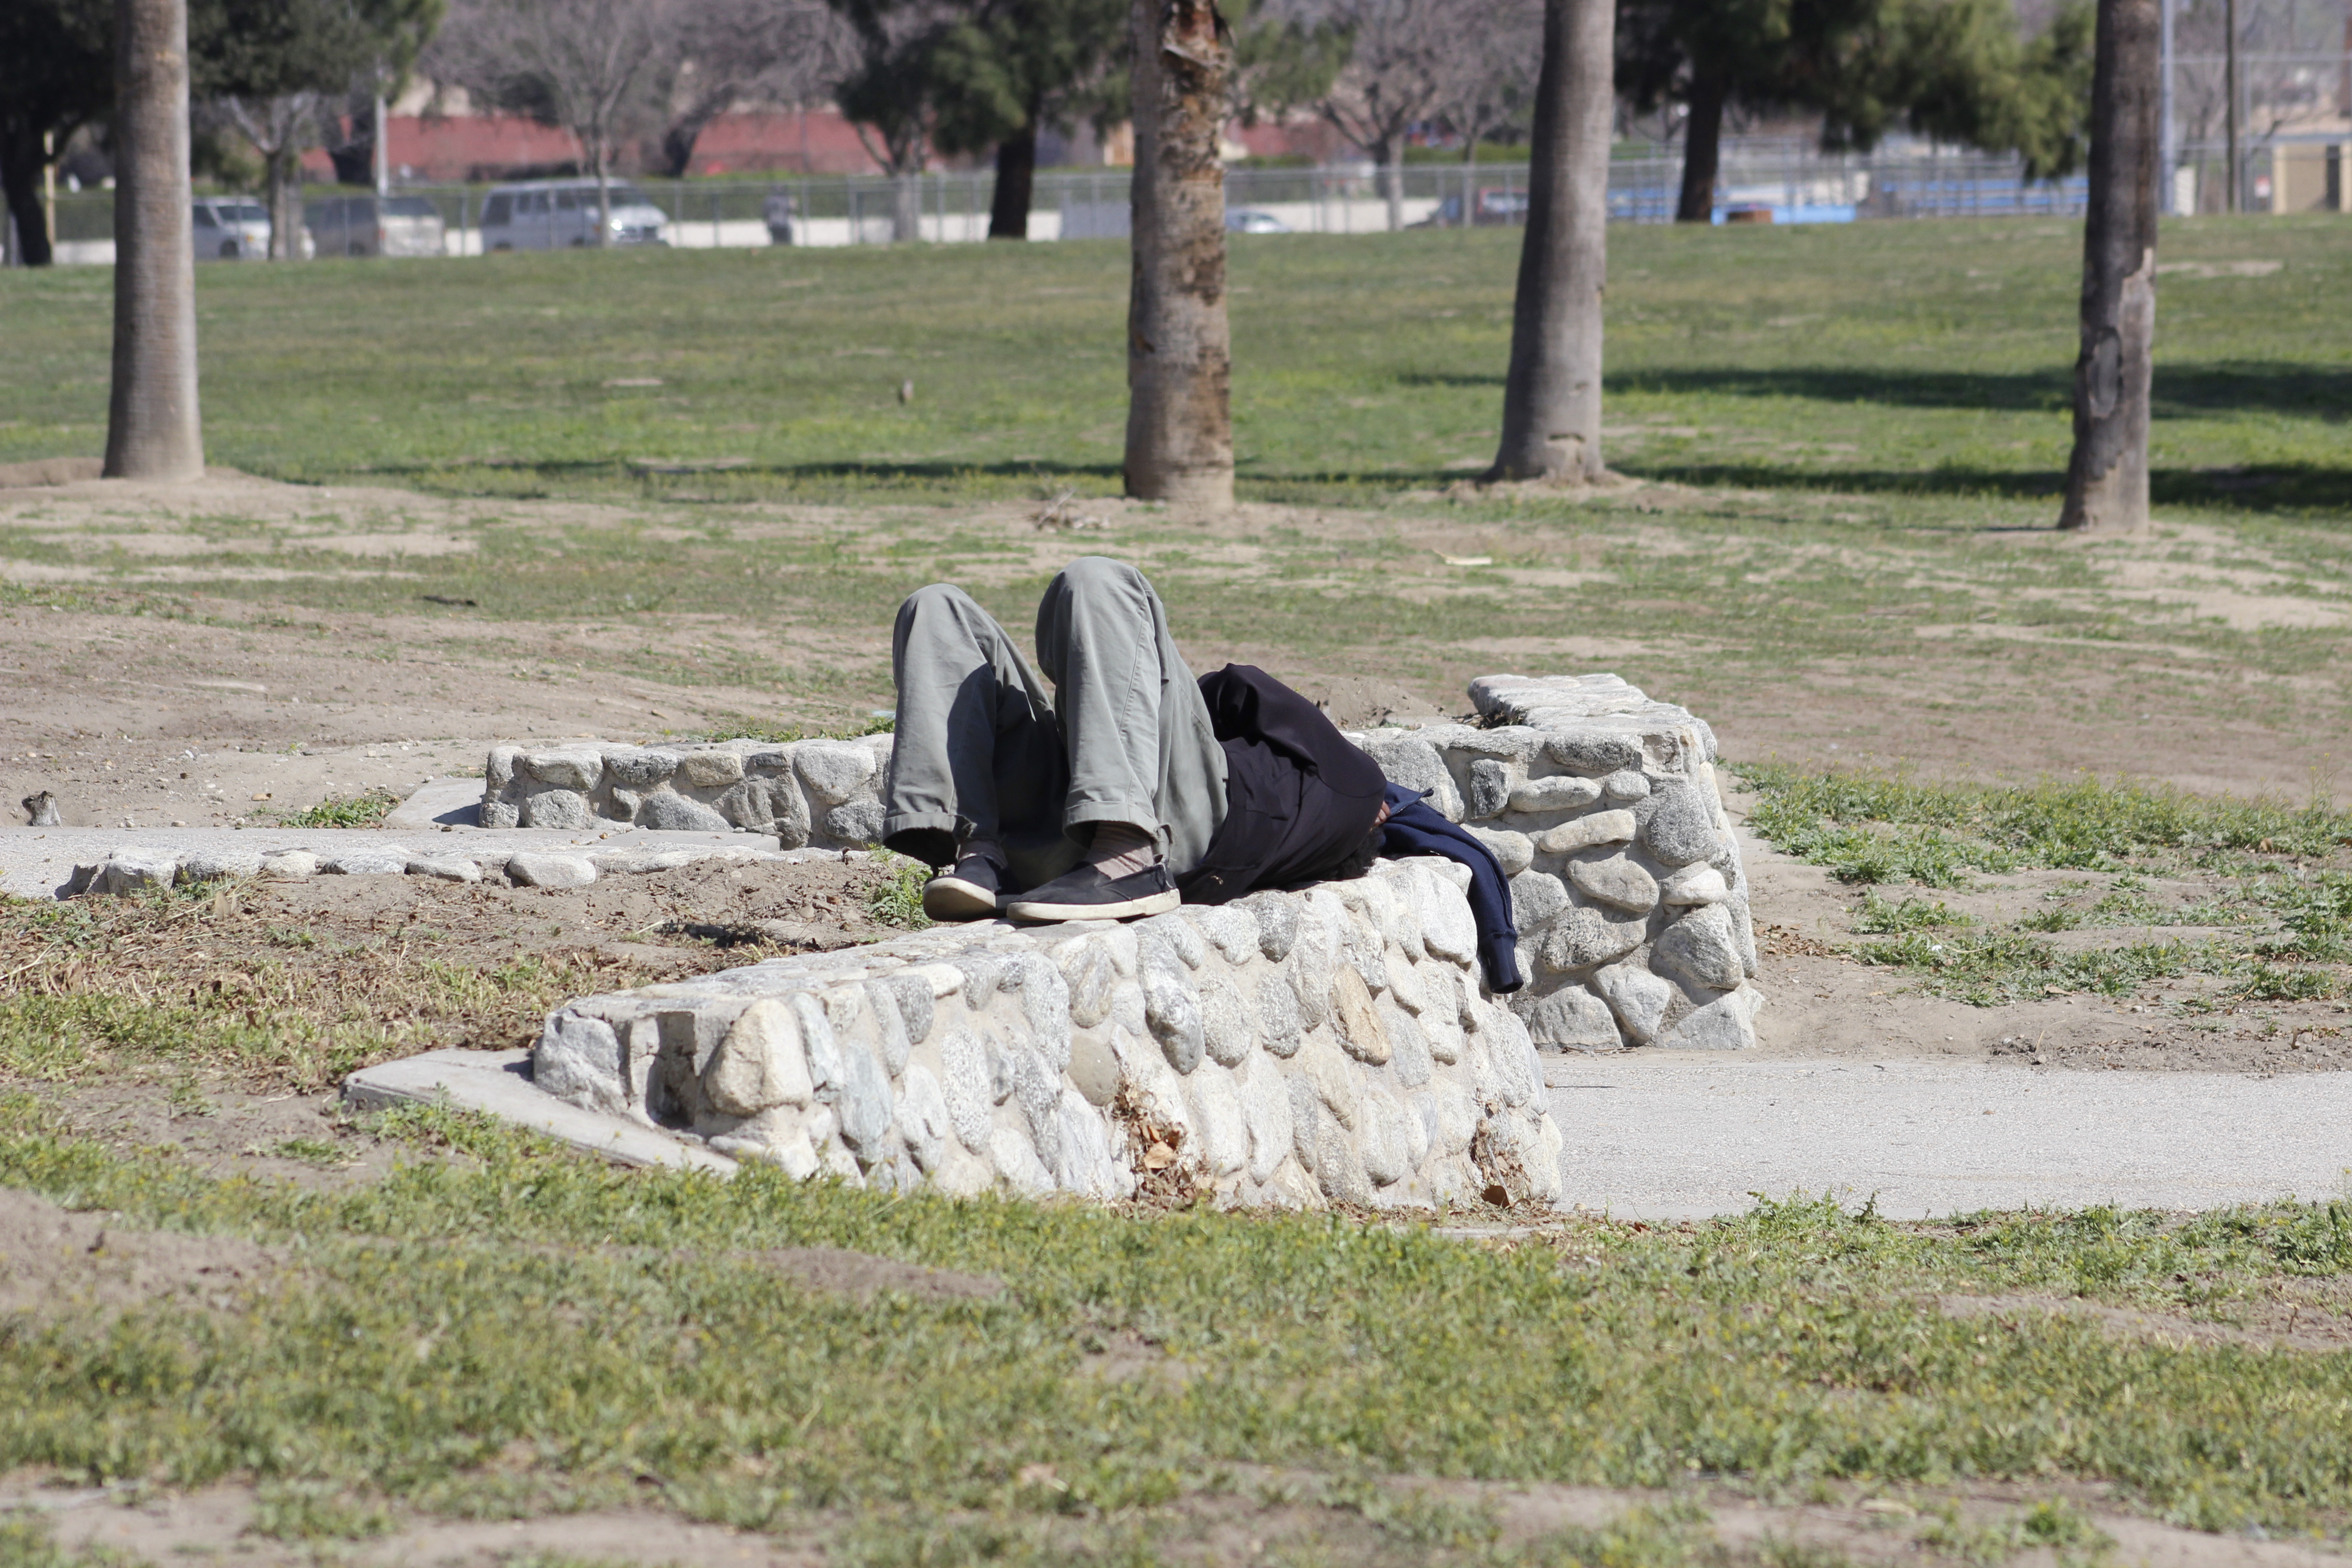 S.B. Council could approve funding for homeless solutions and housing projects